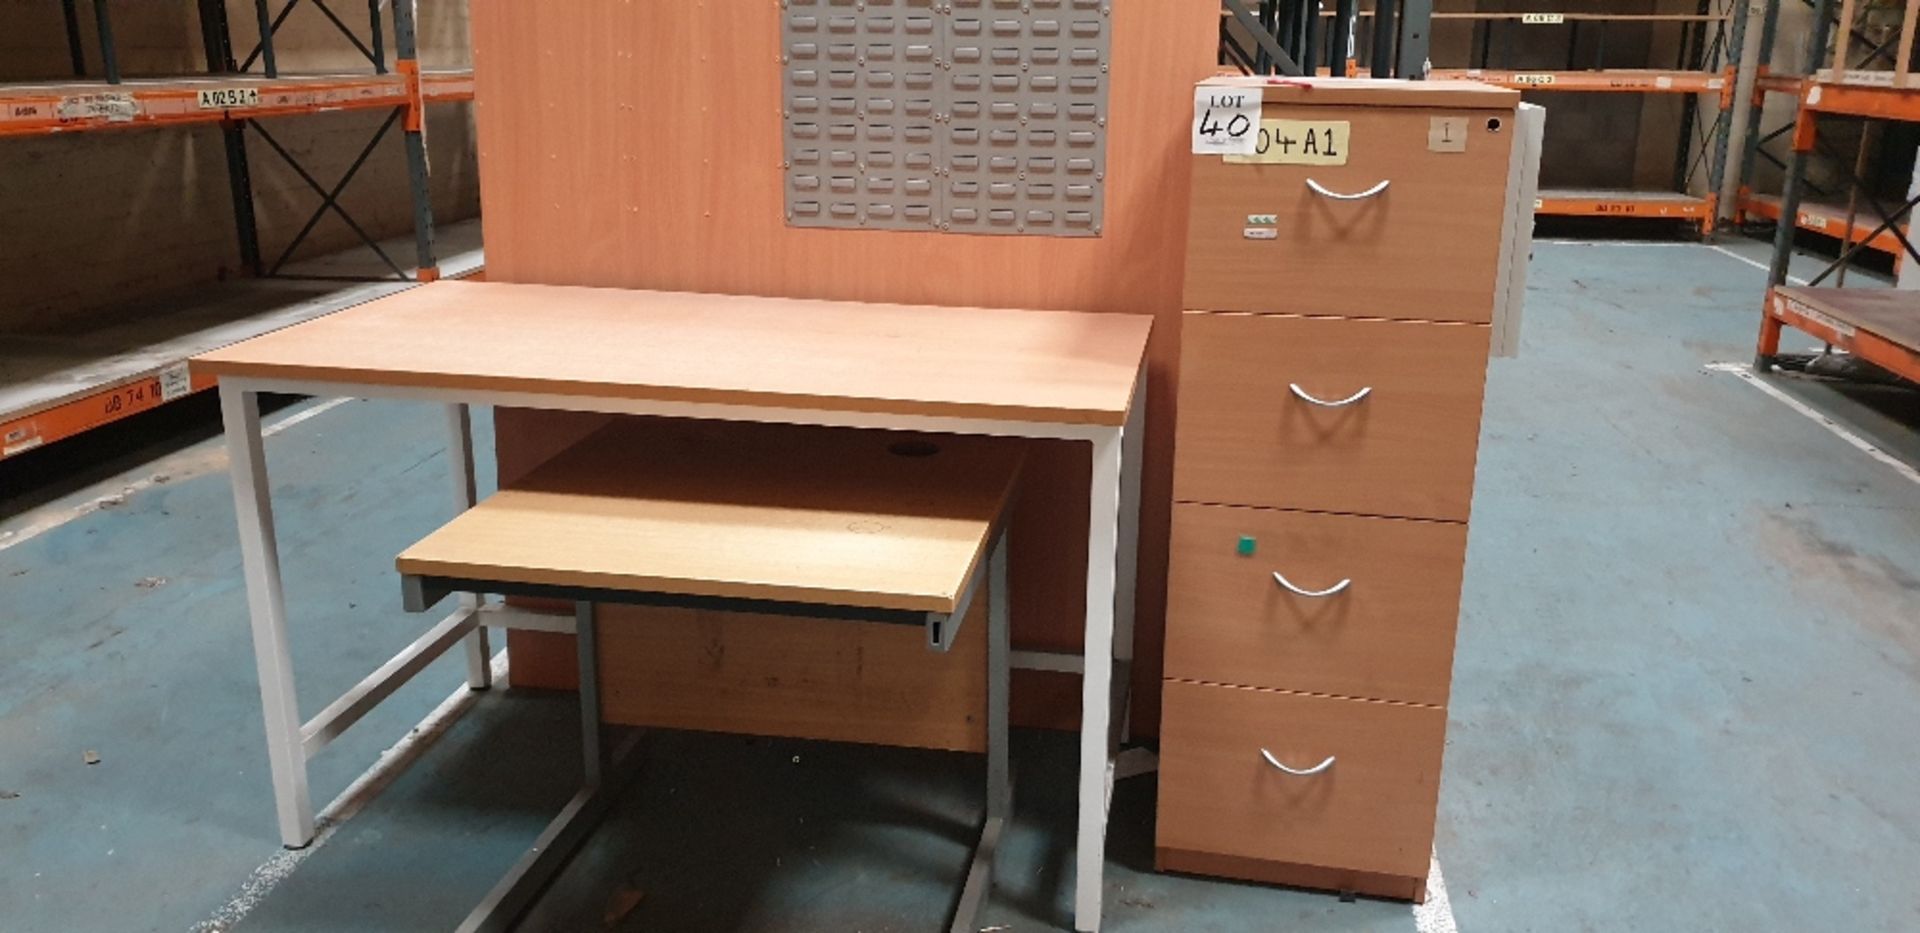 Wooden four drawer filing cabinet and 2 - tables